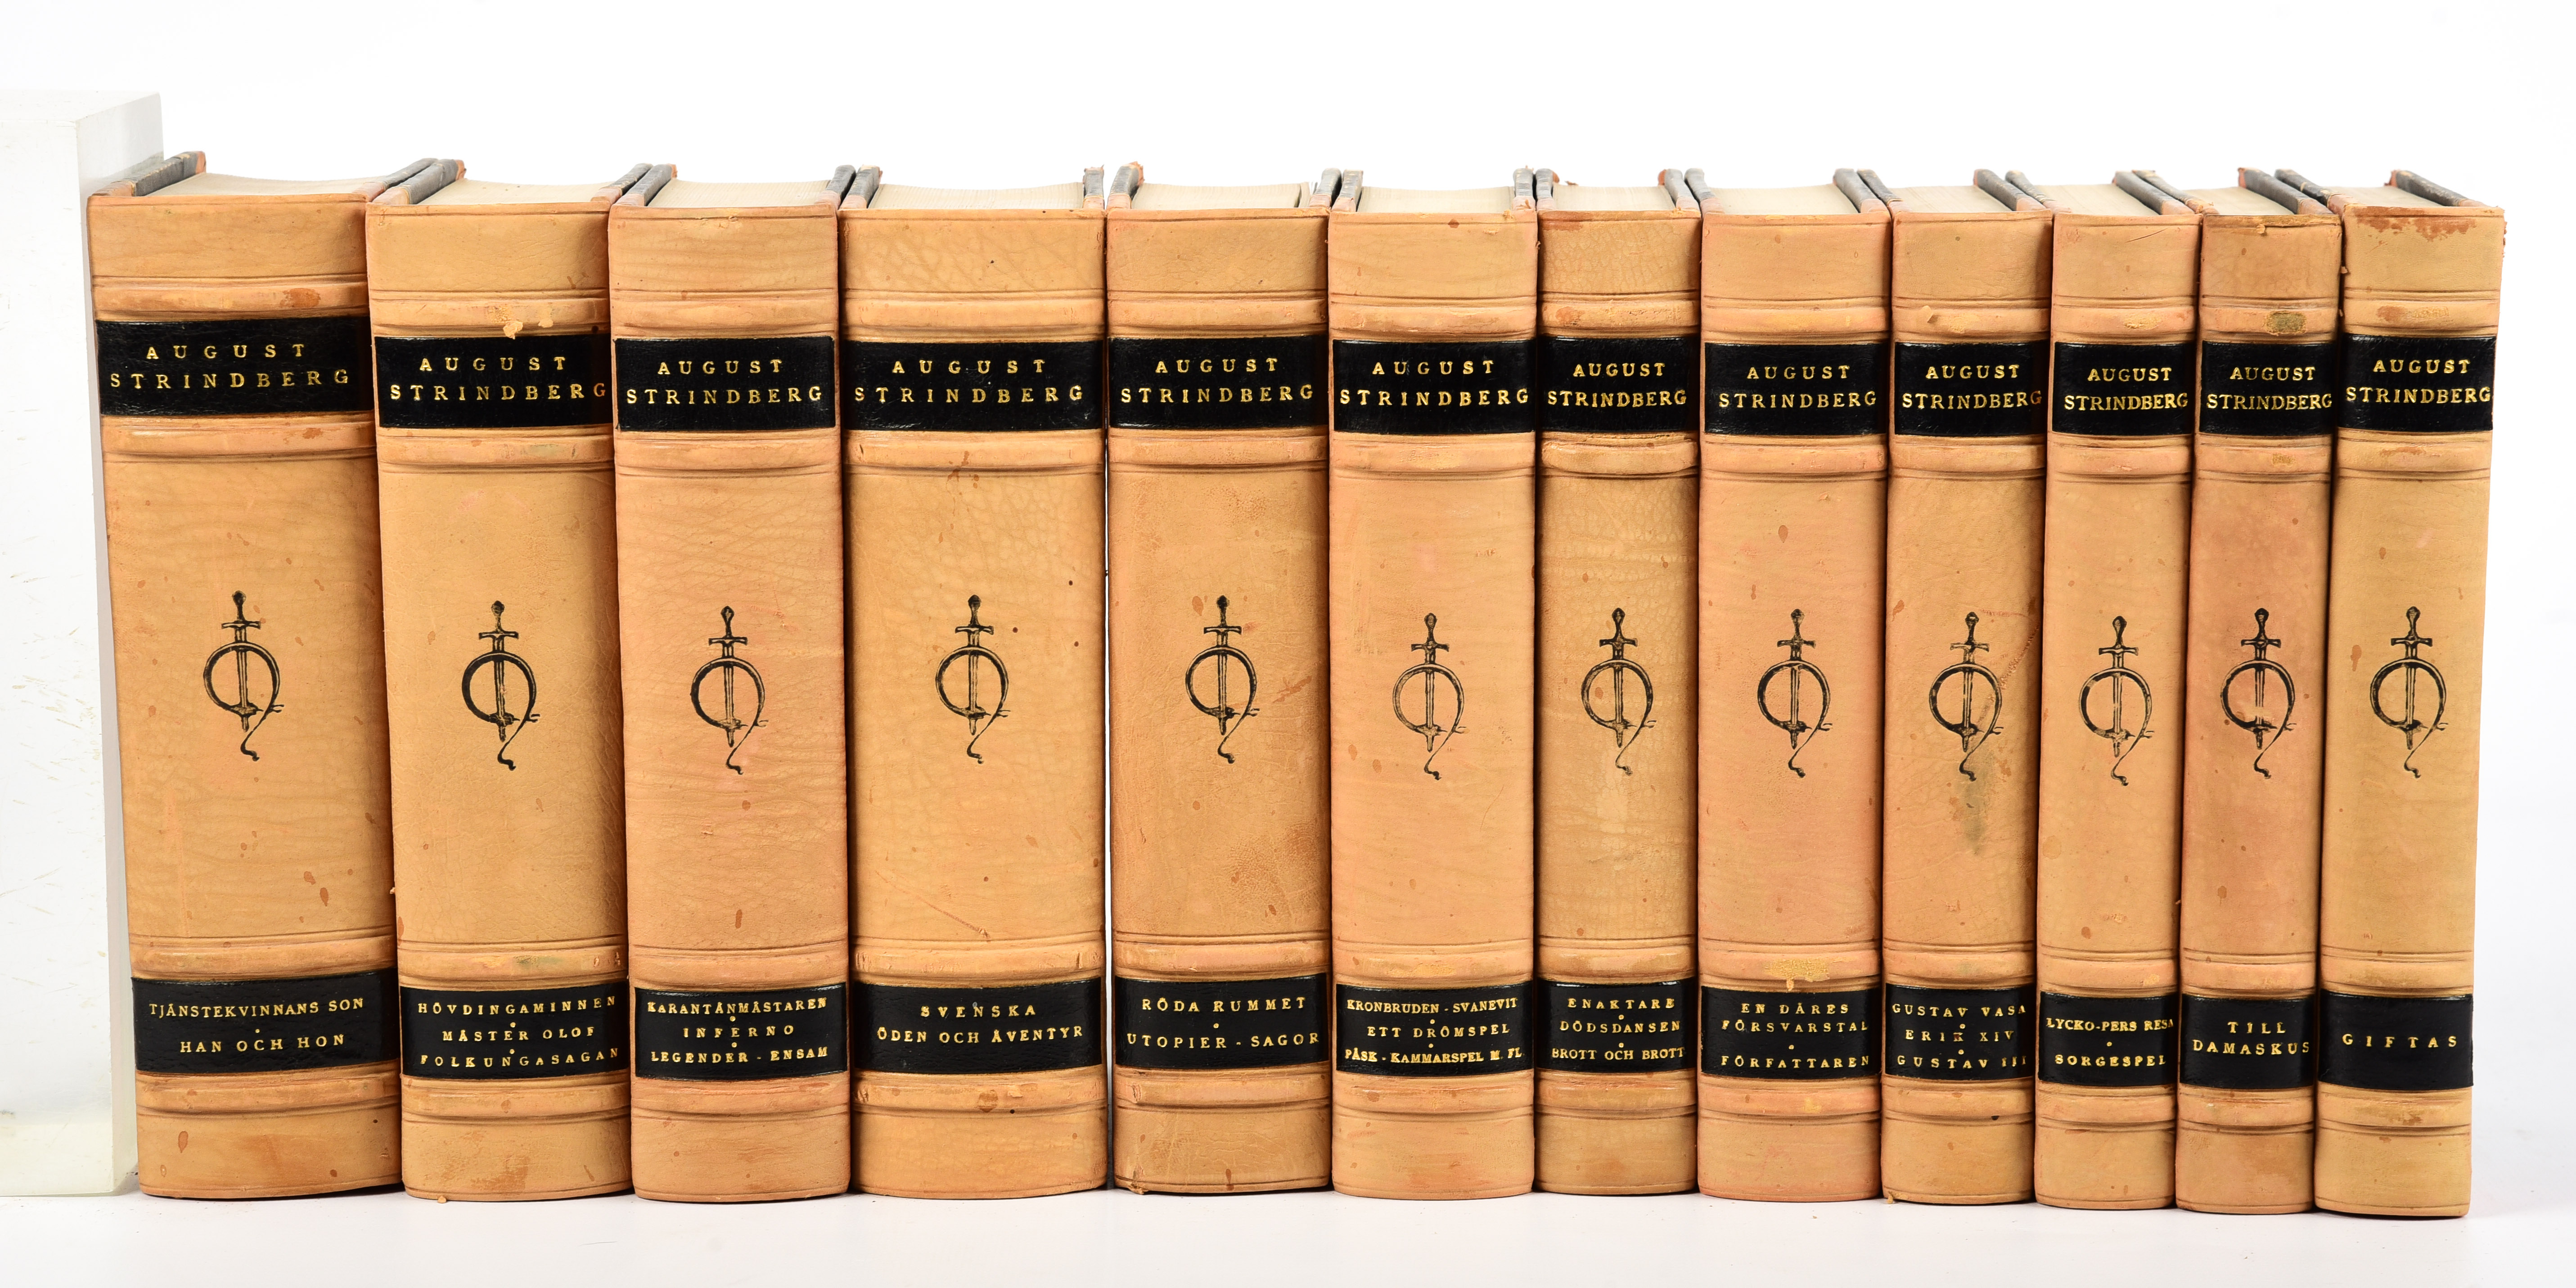 A 12-volume set in Swedish of the